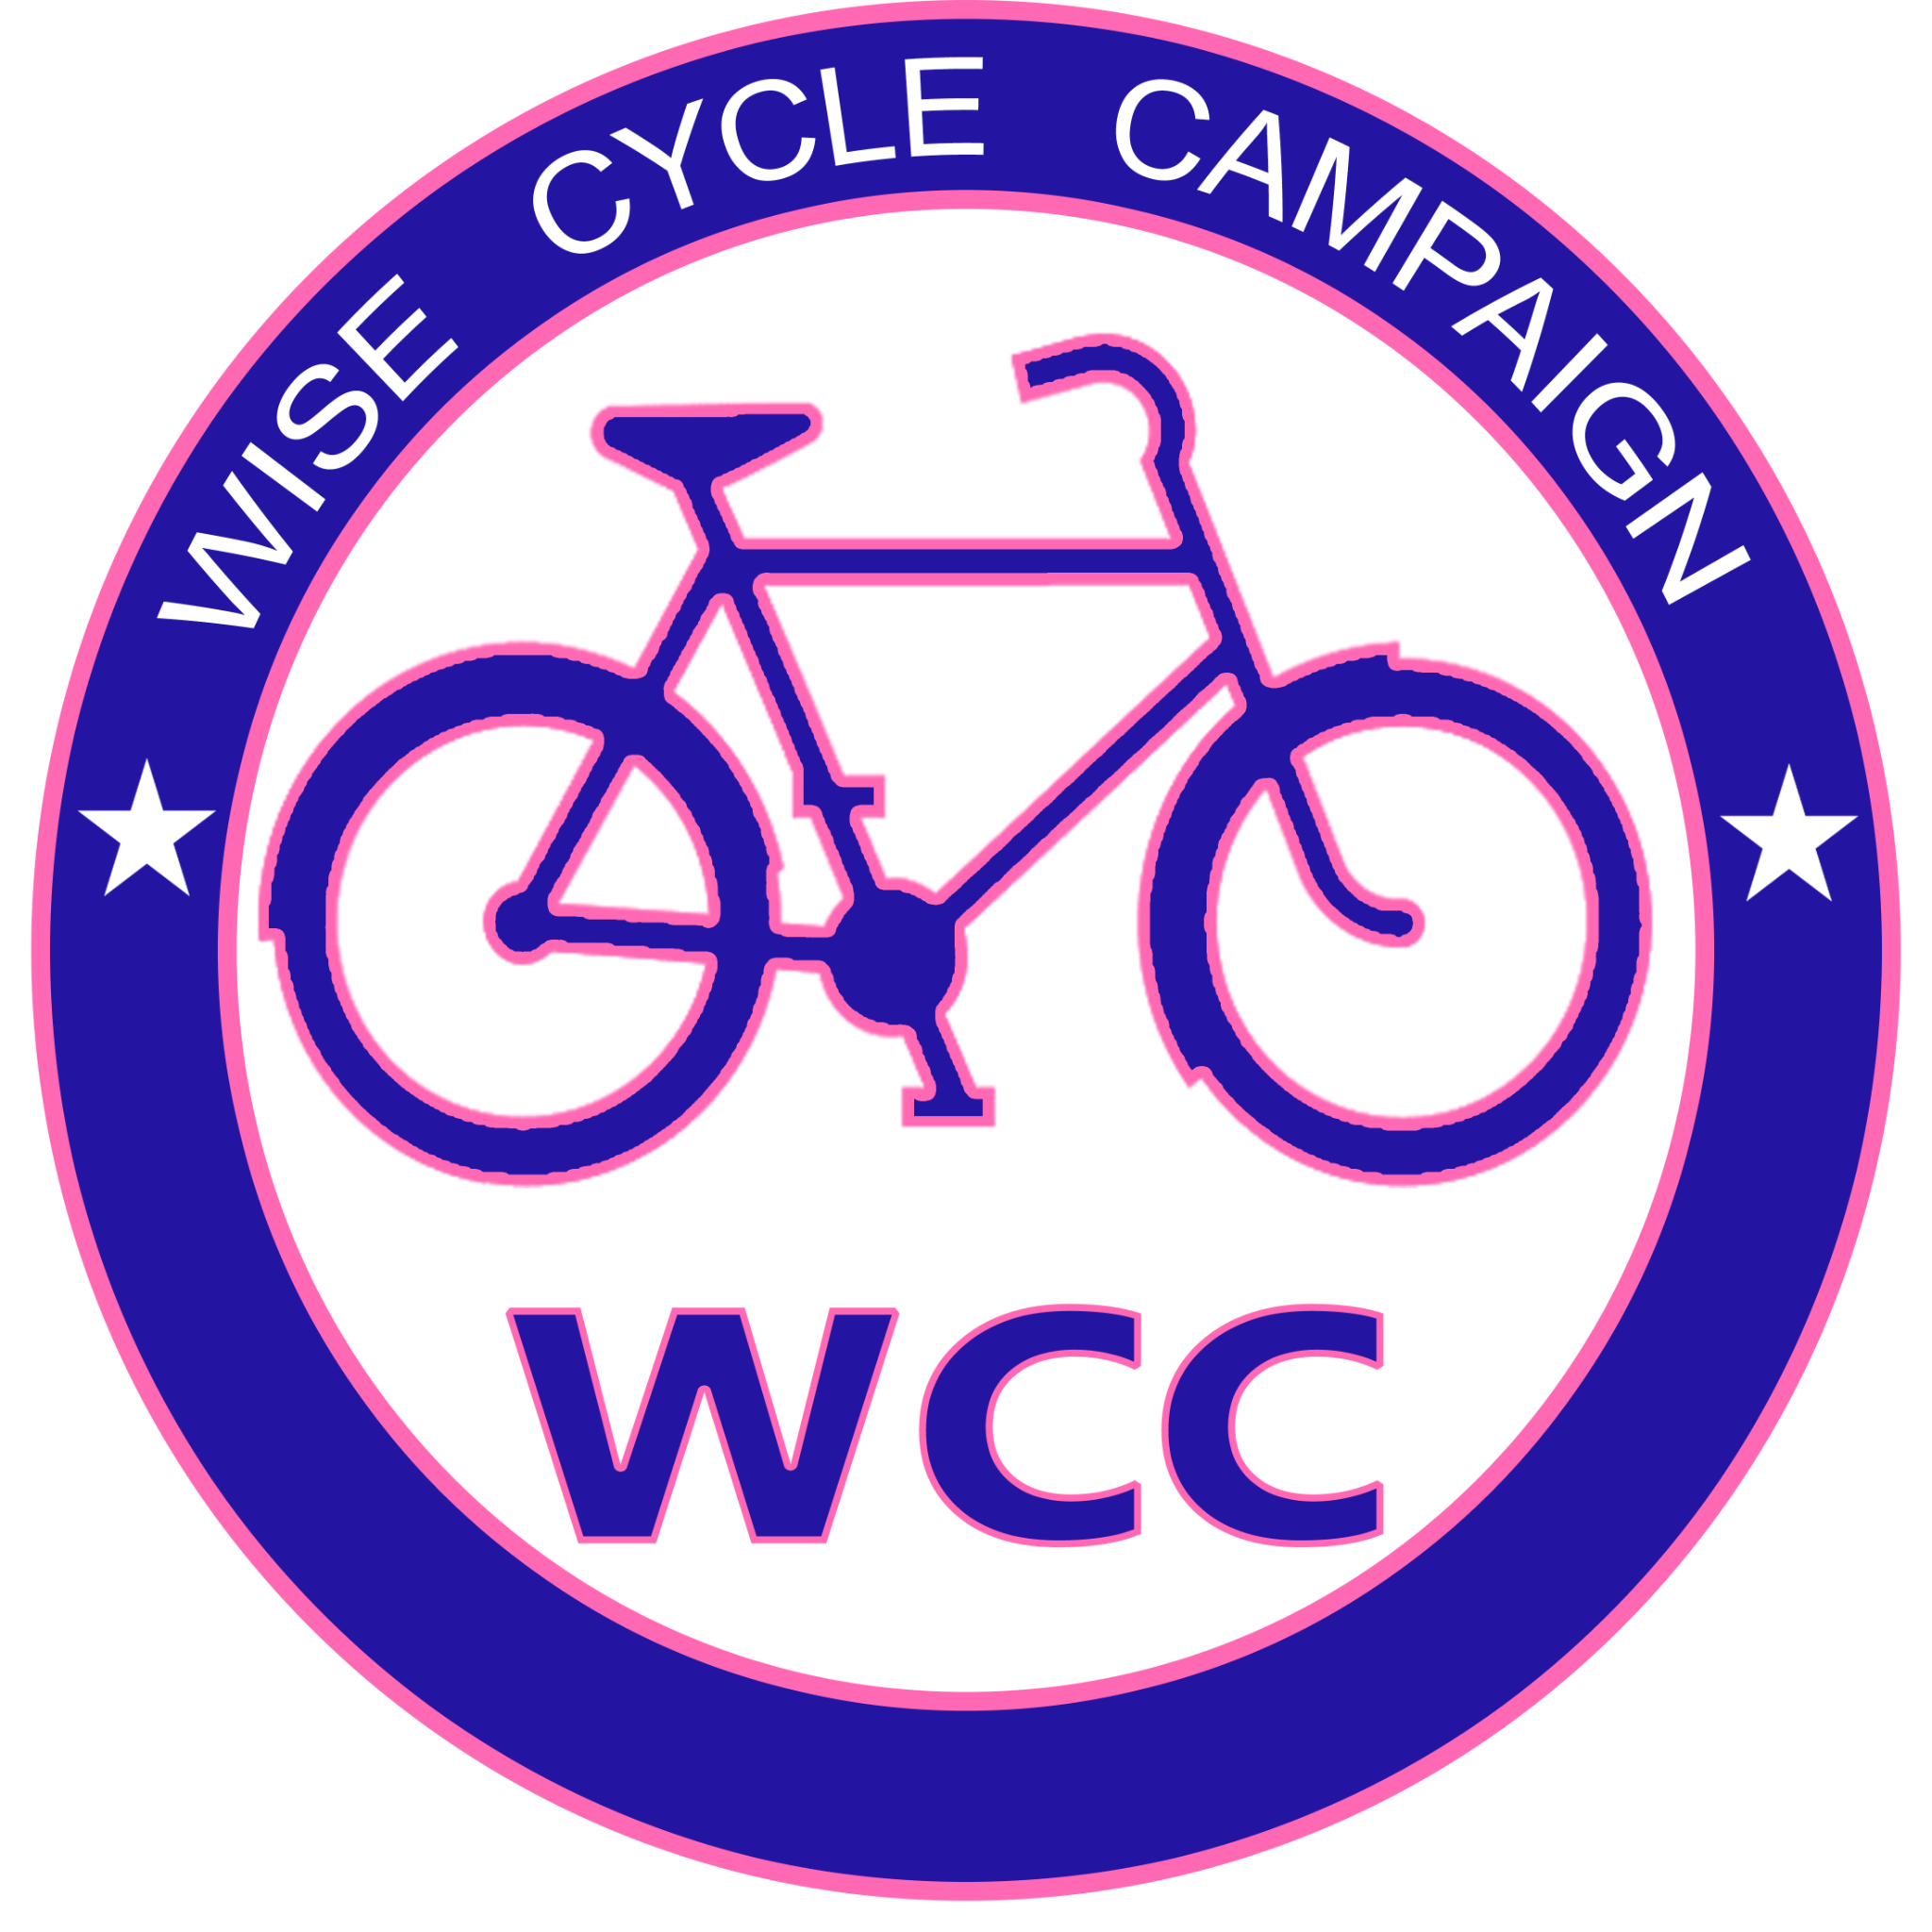 Wise Cycle Campaign - Wise Counsel Foundation - Annual Bike Giveaway